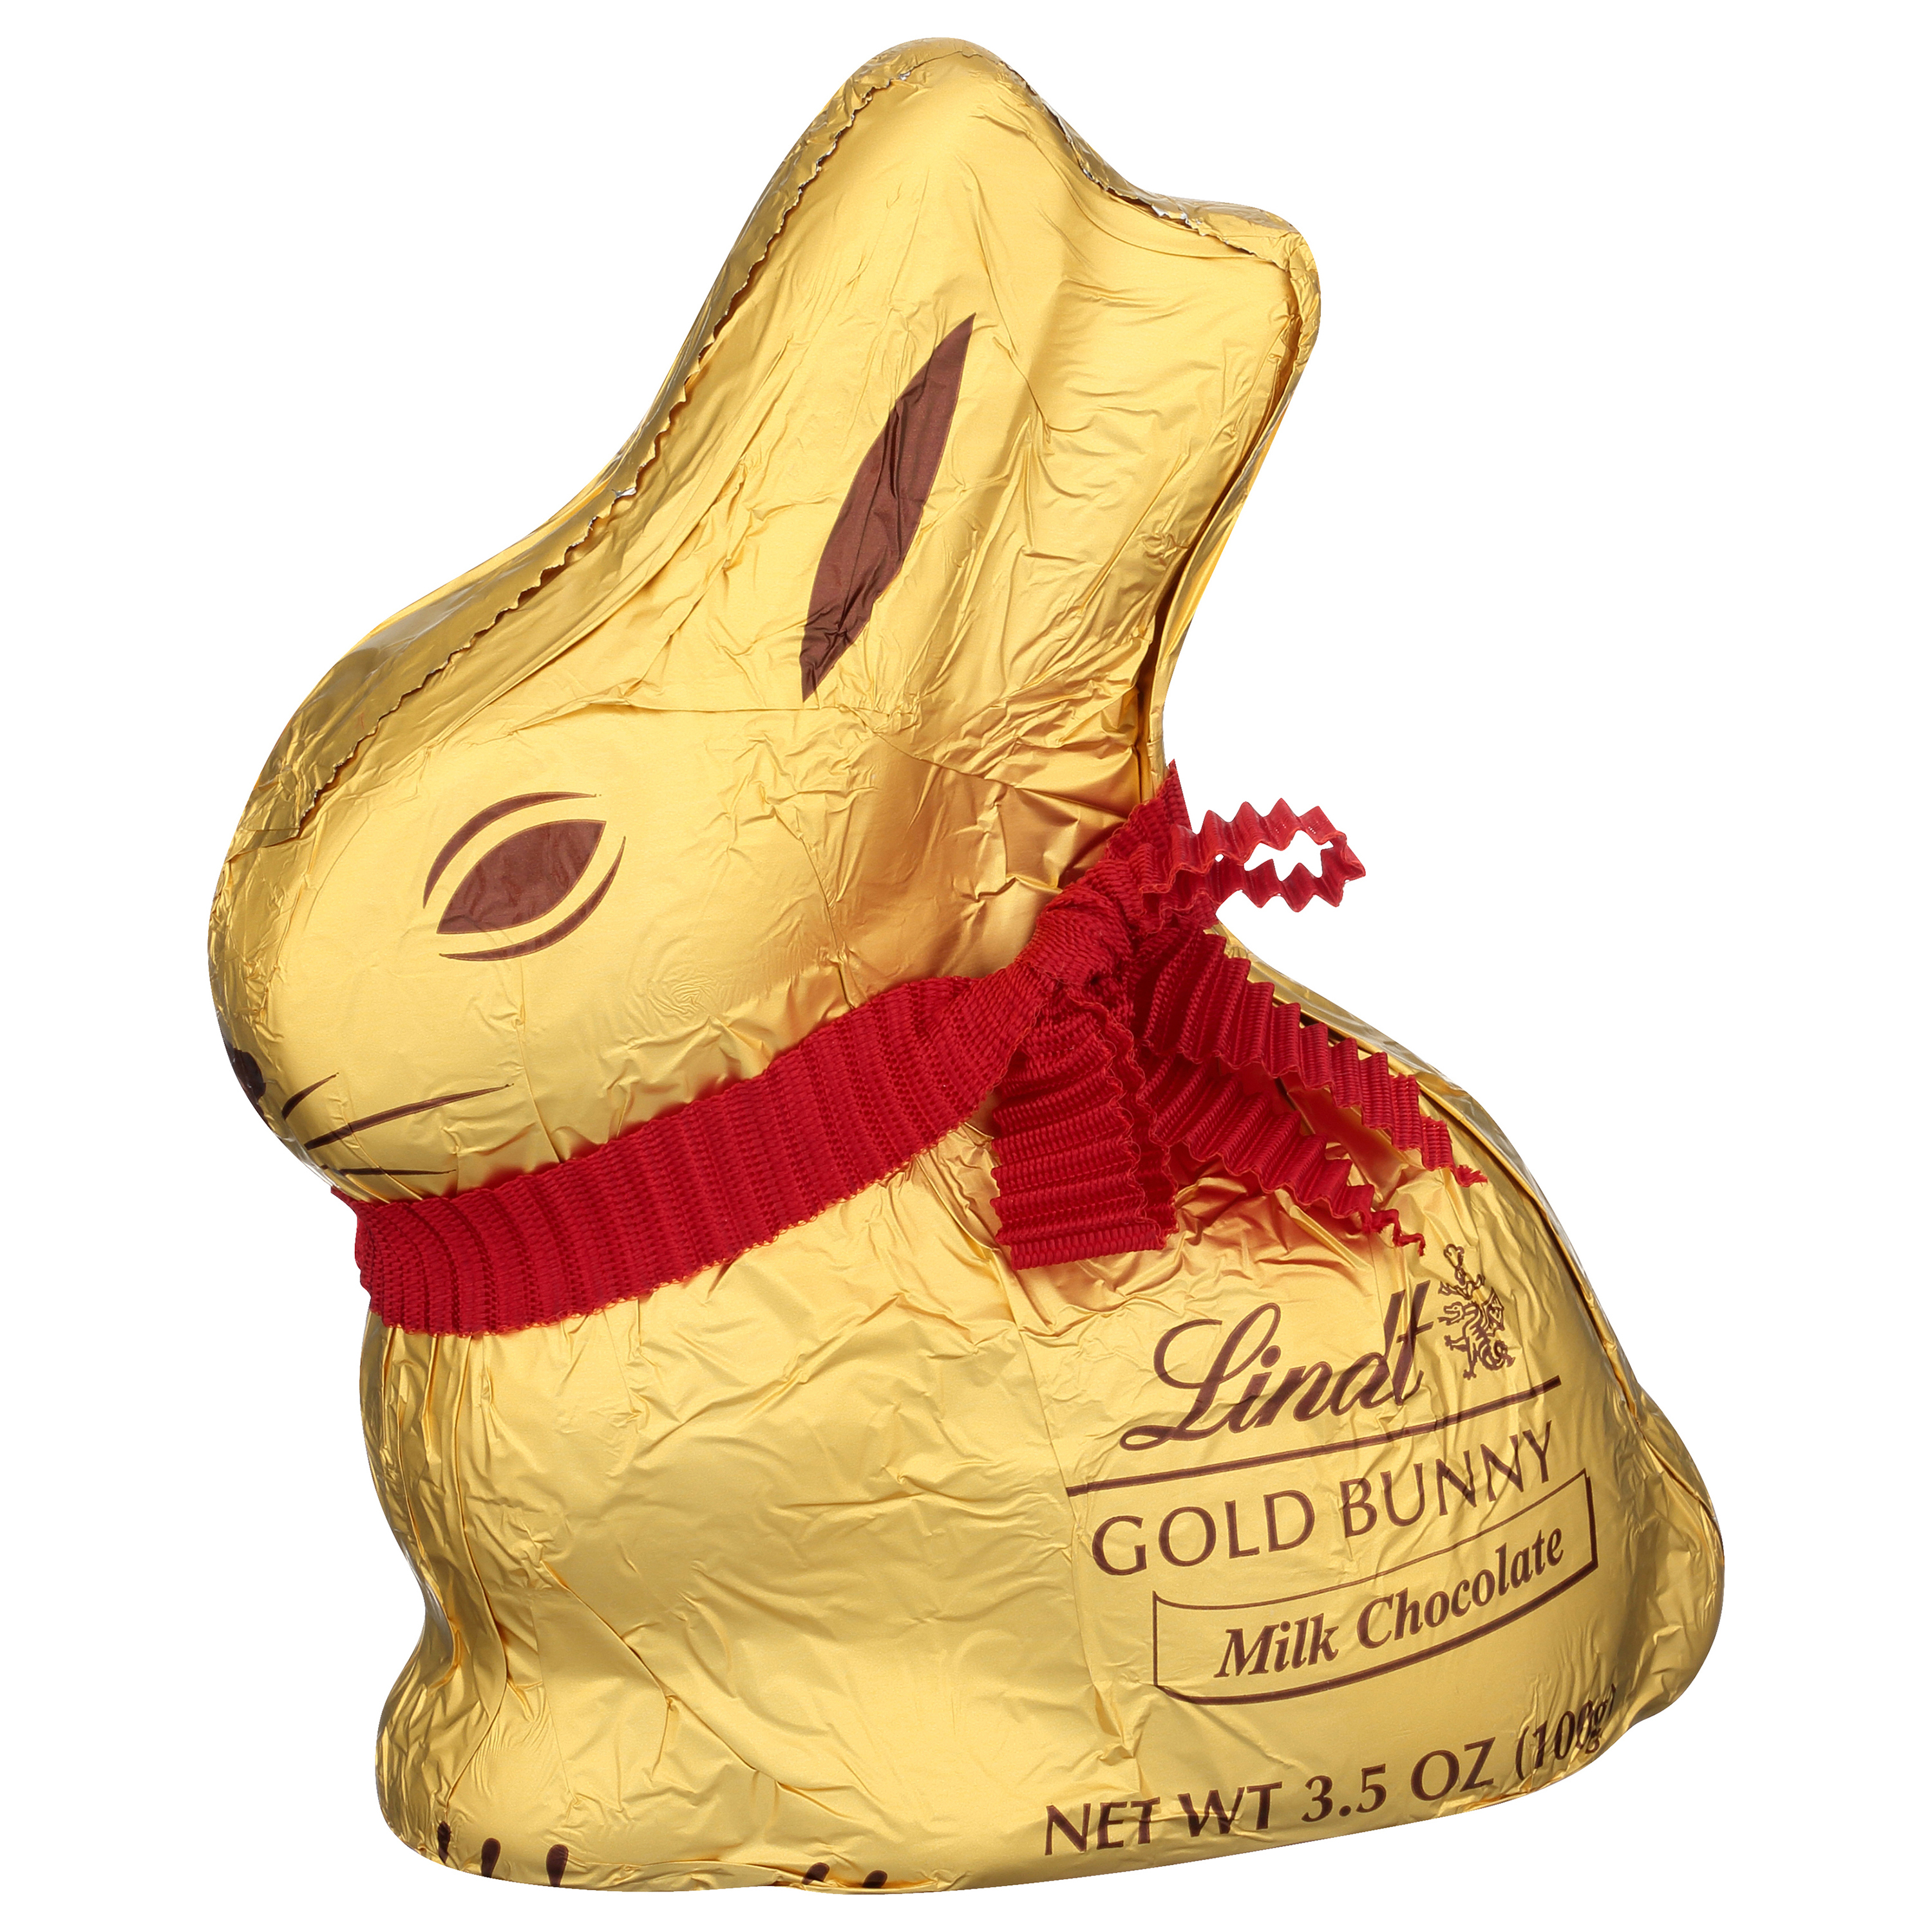 Lindt Gold Bunny, Milk Chocolate, Easter Chocolate Candy Bunny, 3.5 oz, 1 Count - image 1 of 12